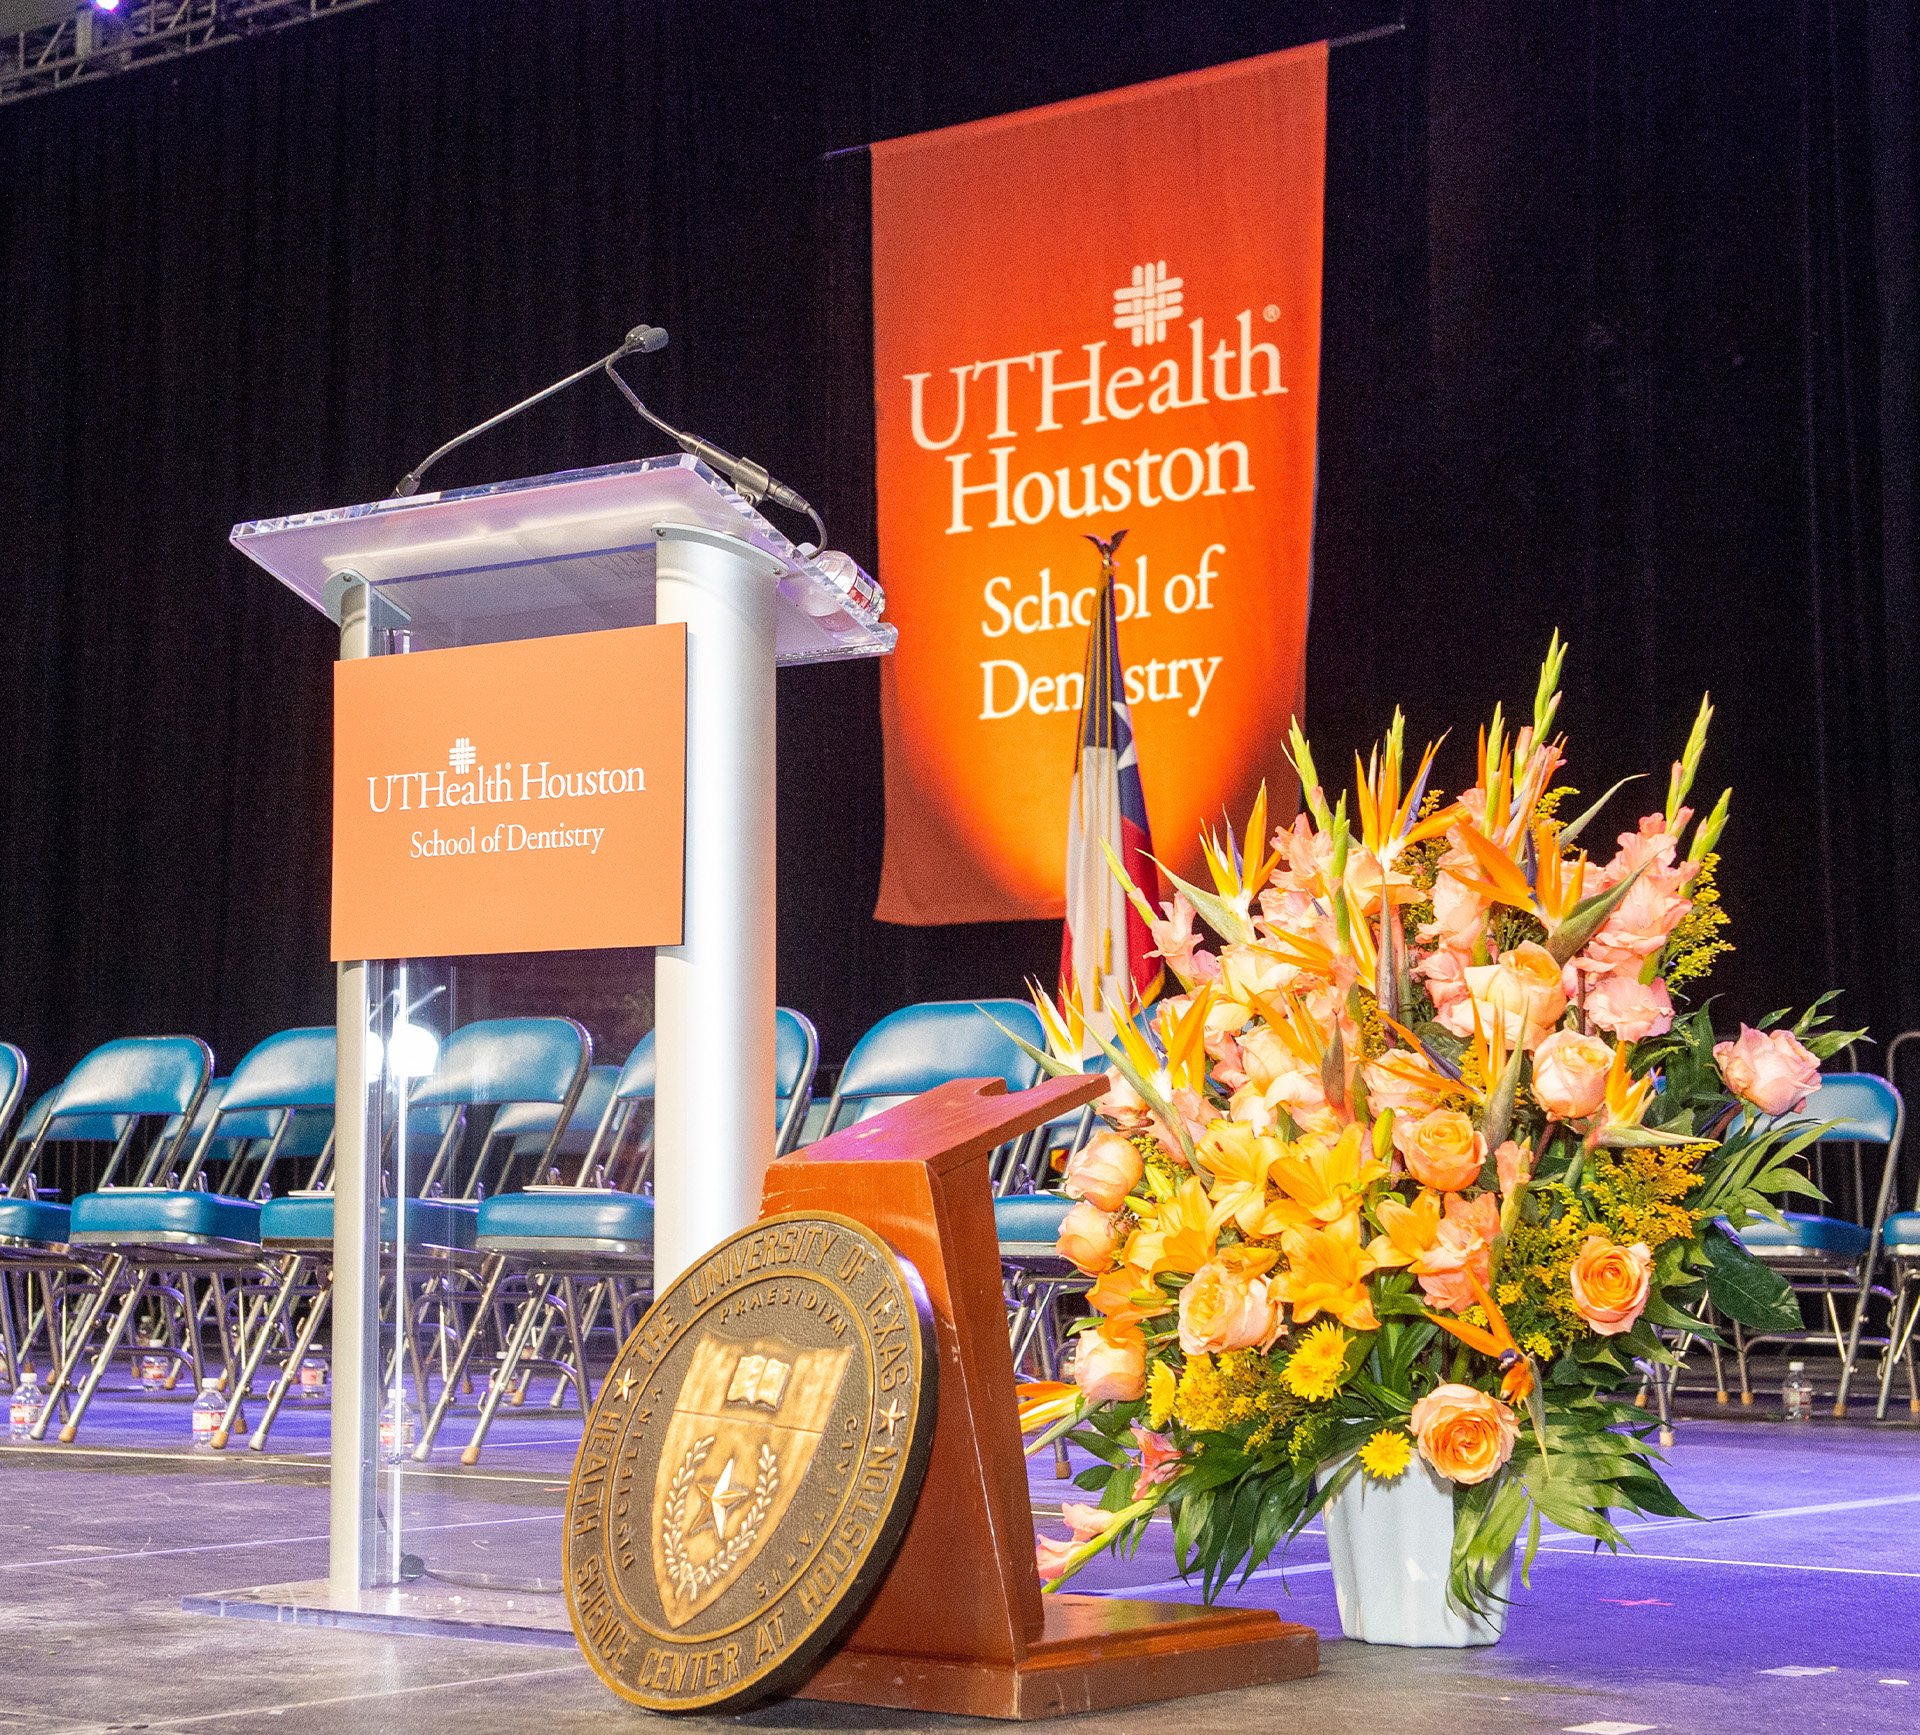 UTHealth Houston School of Dentistry will hold its 119th Commencement Ceremony at 3 p.m. Friday, May 10, from NRG Arena.